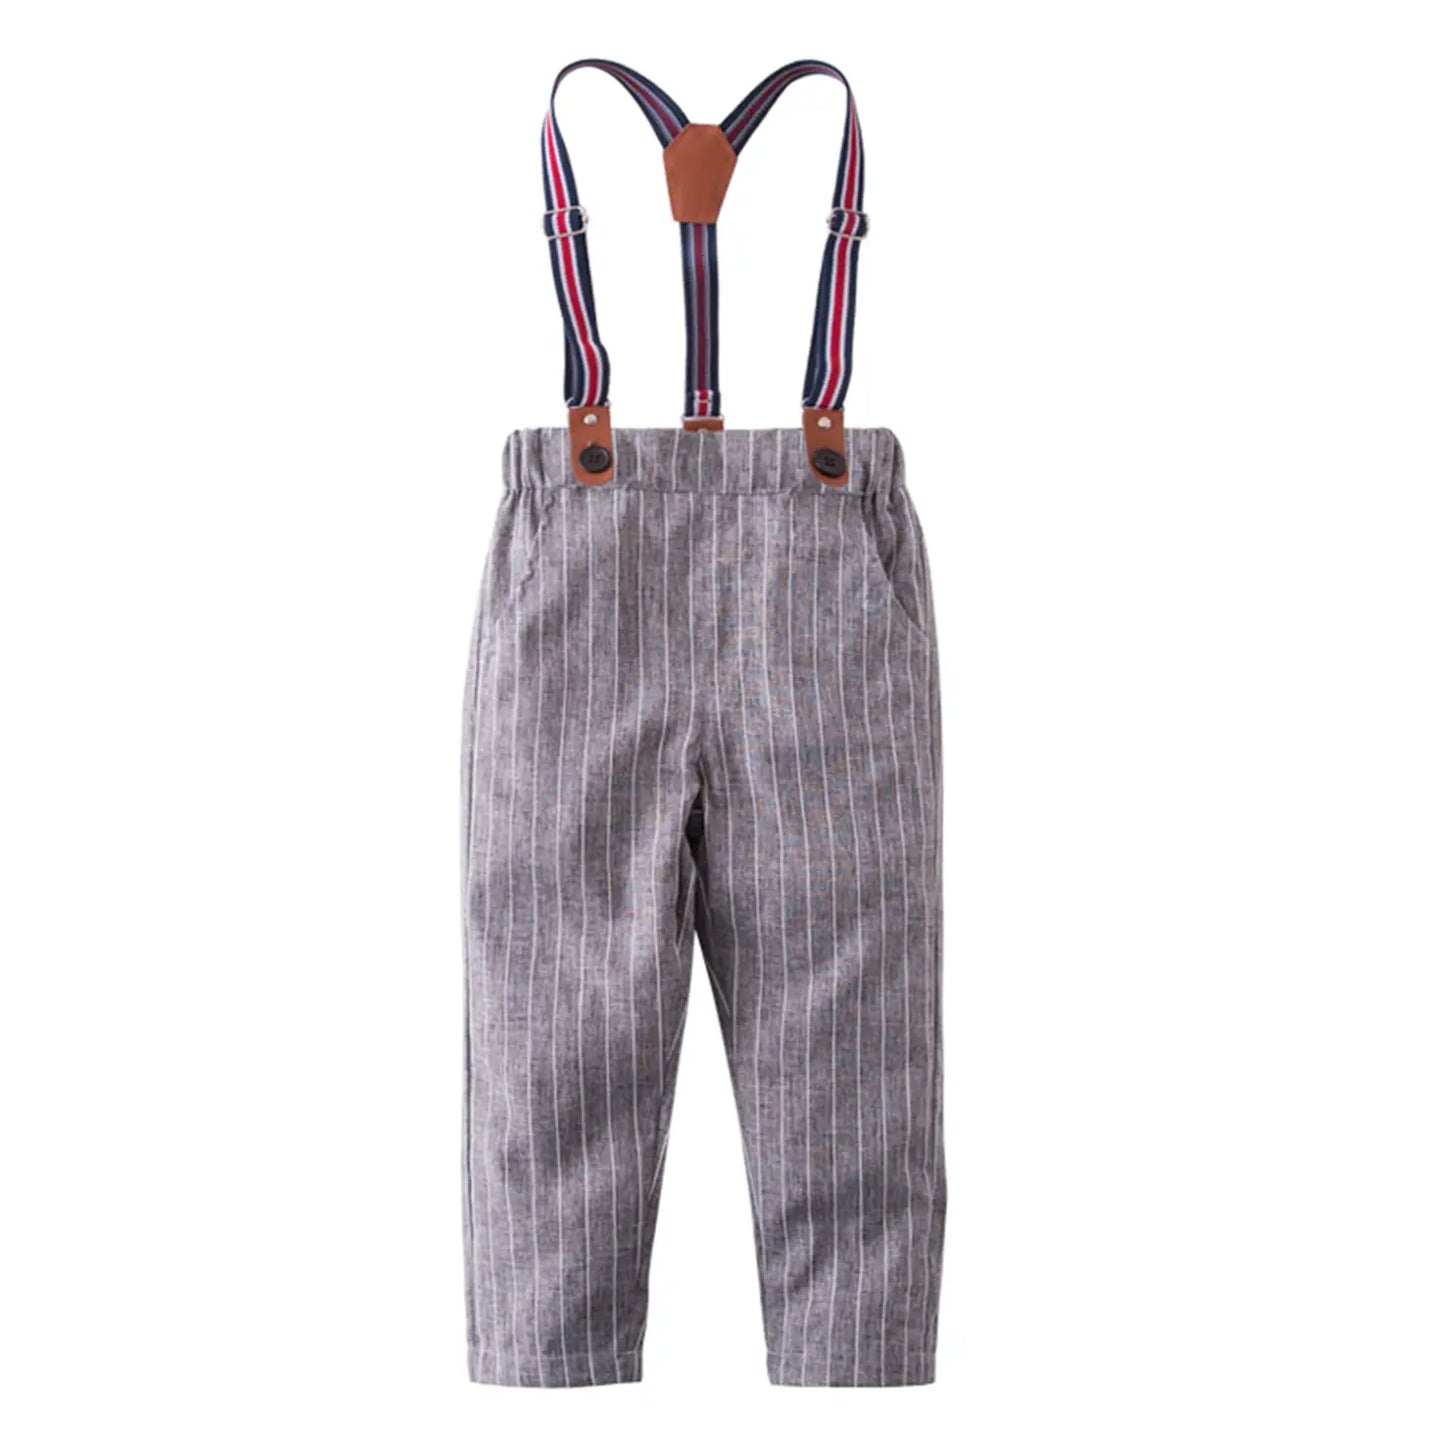 Pants and Suspenders Set